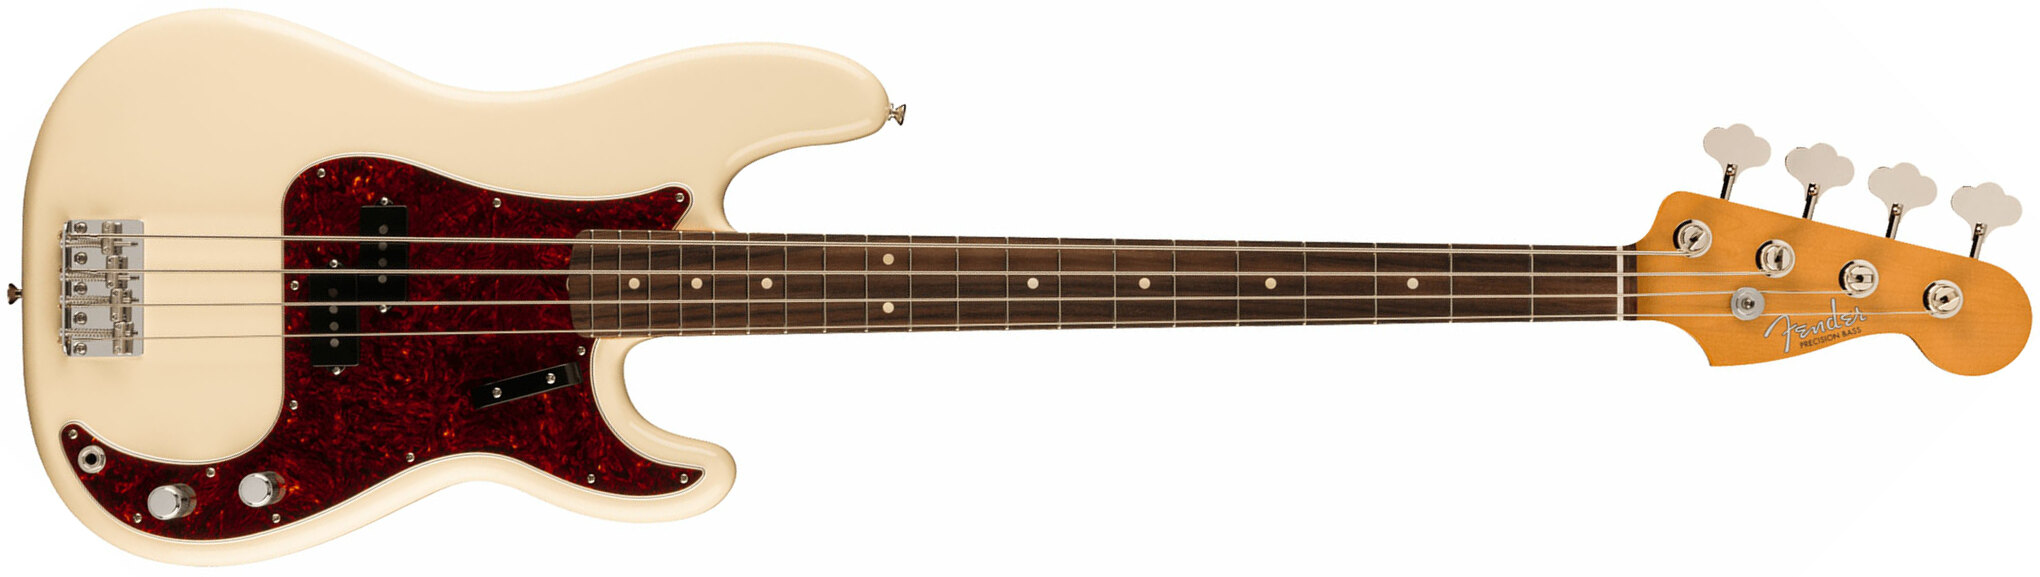 Fender Precision Bass 60s Vintera Ii Mex Rw - Olympic White - Basse Électrique Solid Body - Main picture